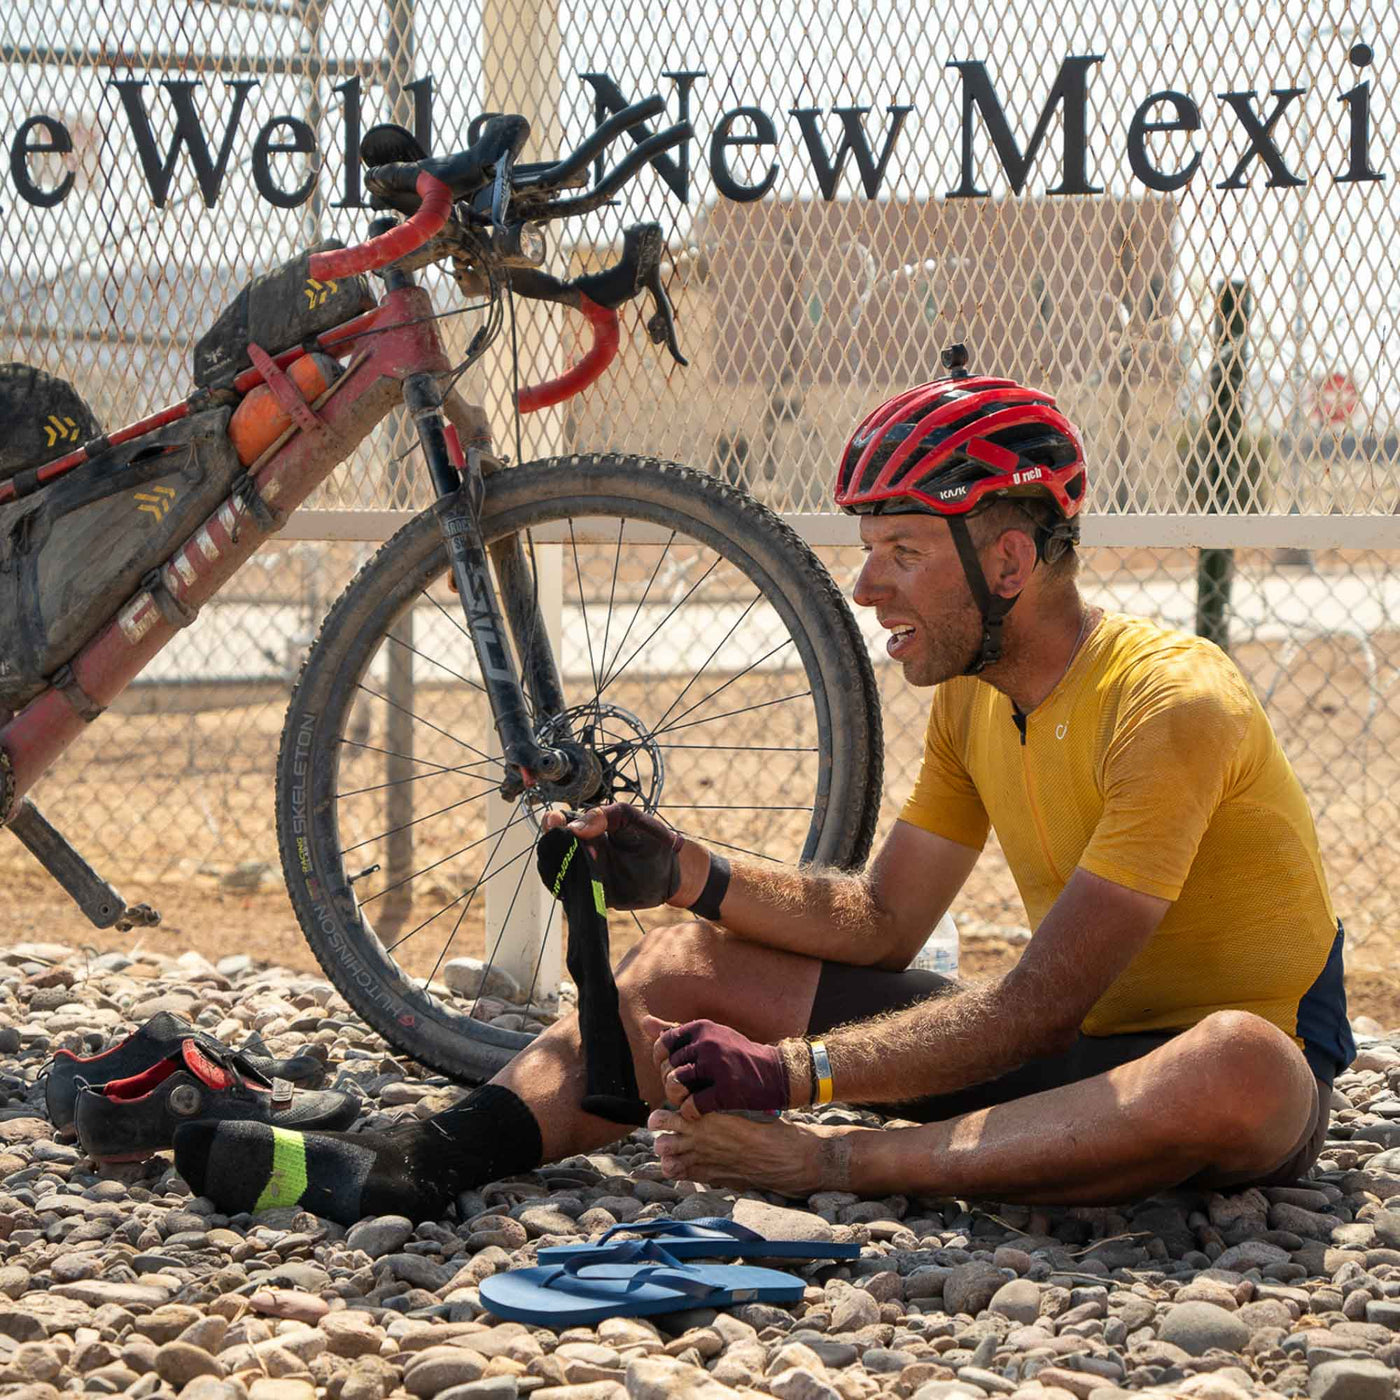 tour divide 2023 results